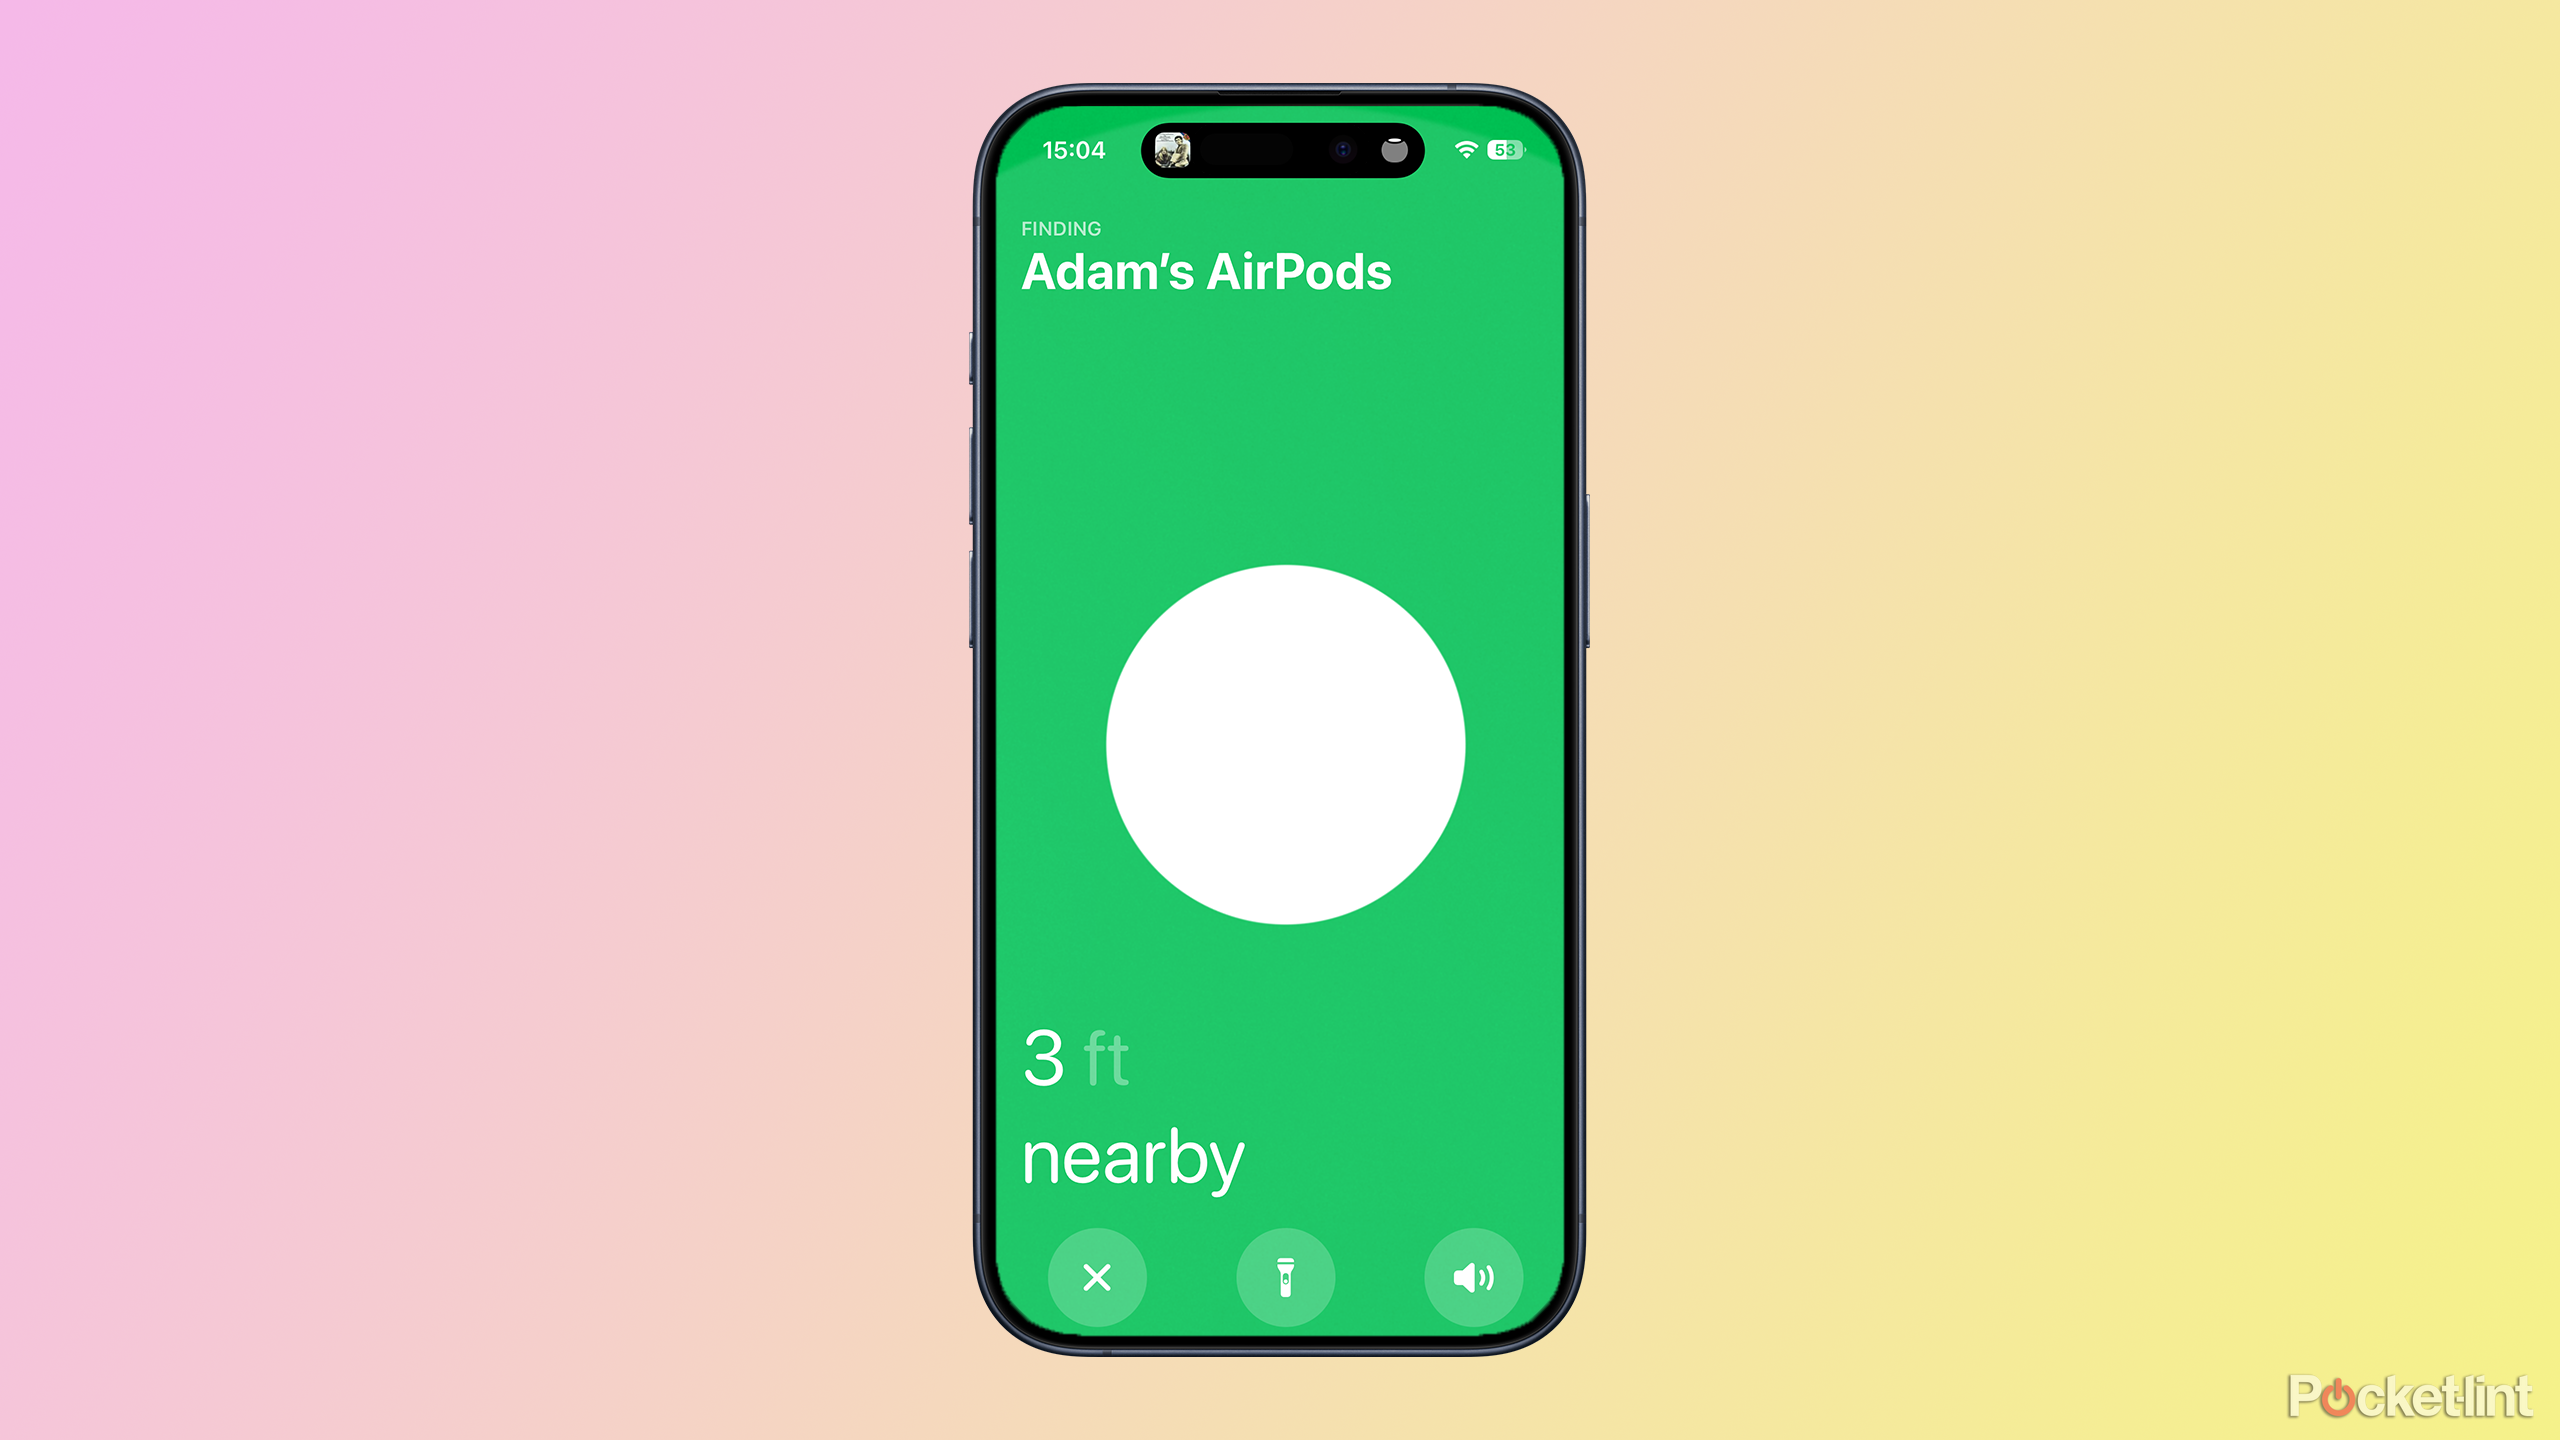 airpods nearby in find my on iphone